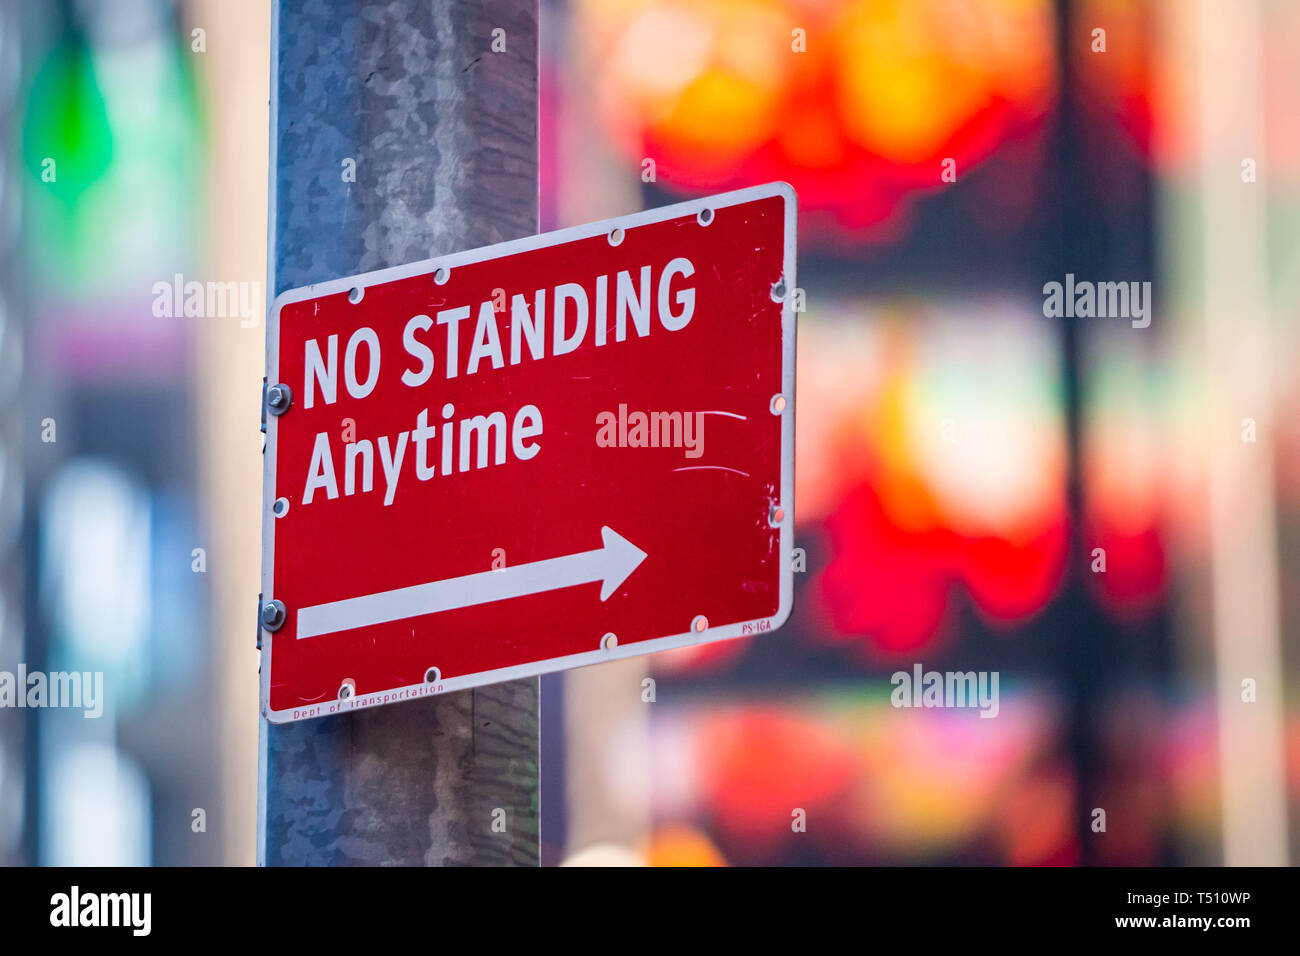 No Standing Anytime street sign in city at day Stock Photo